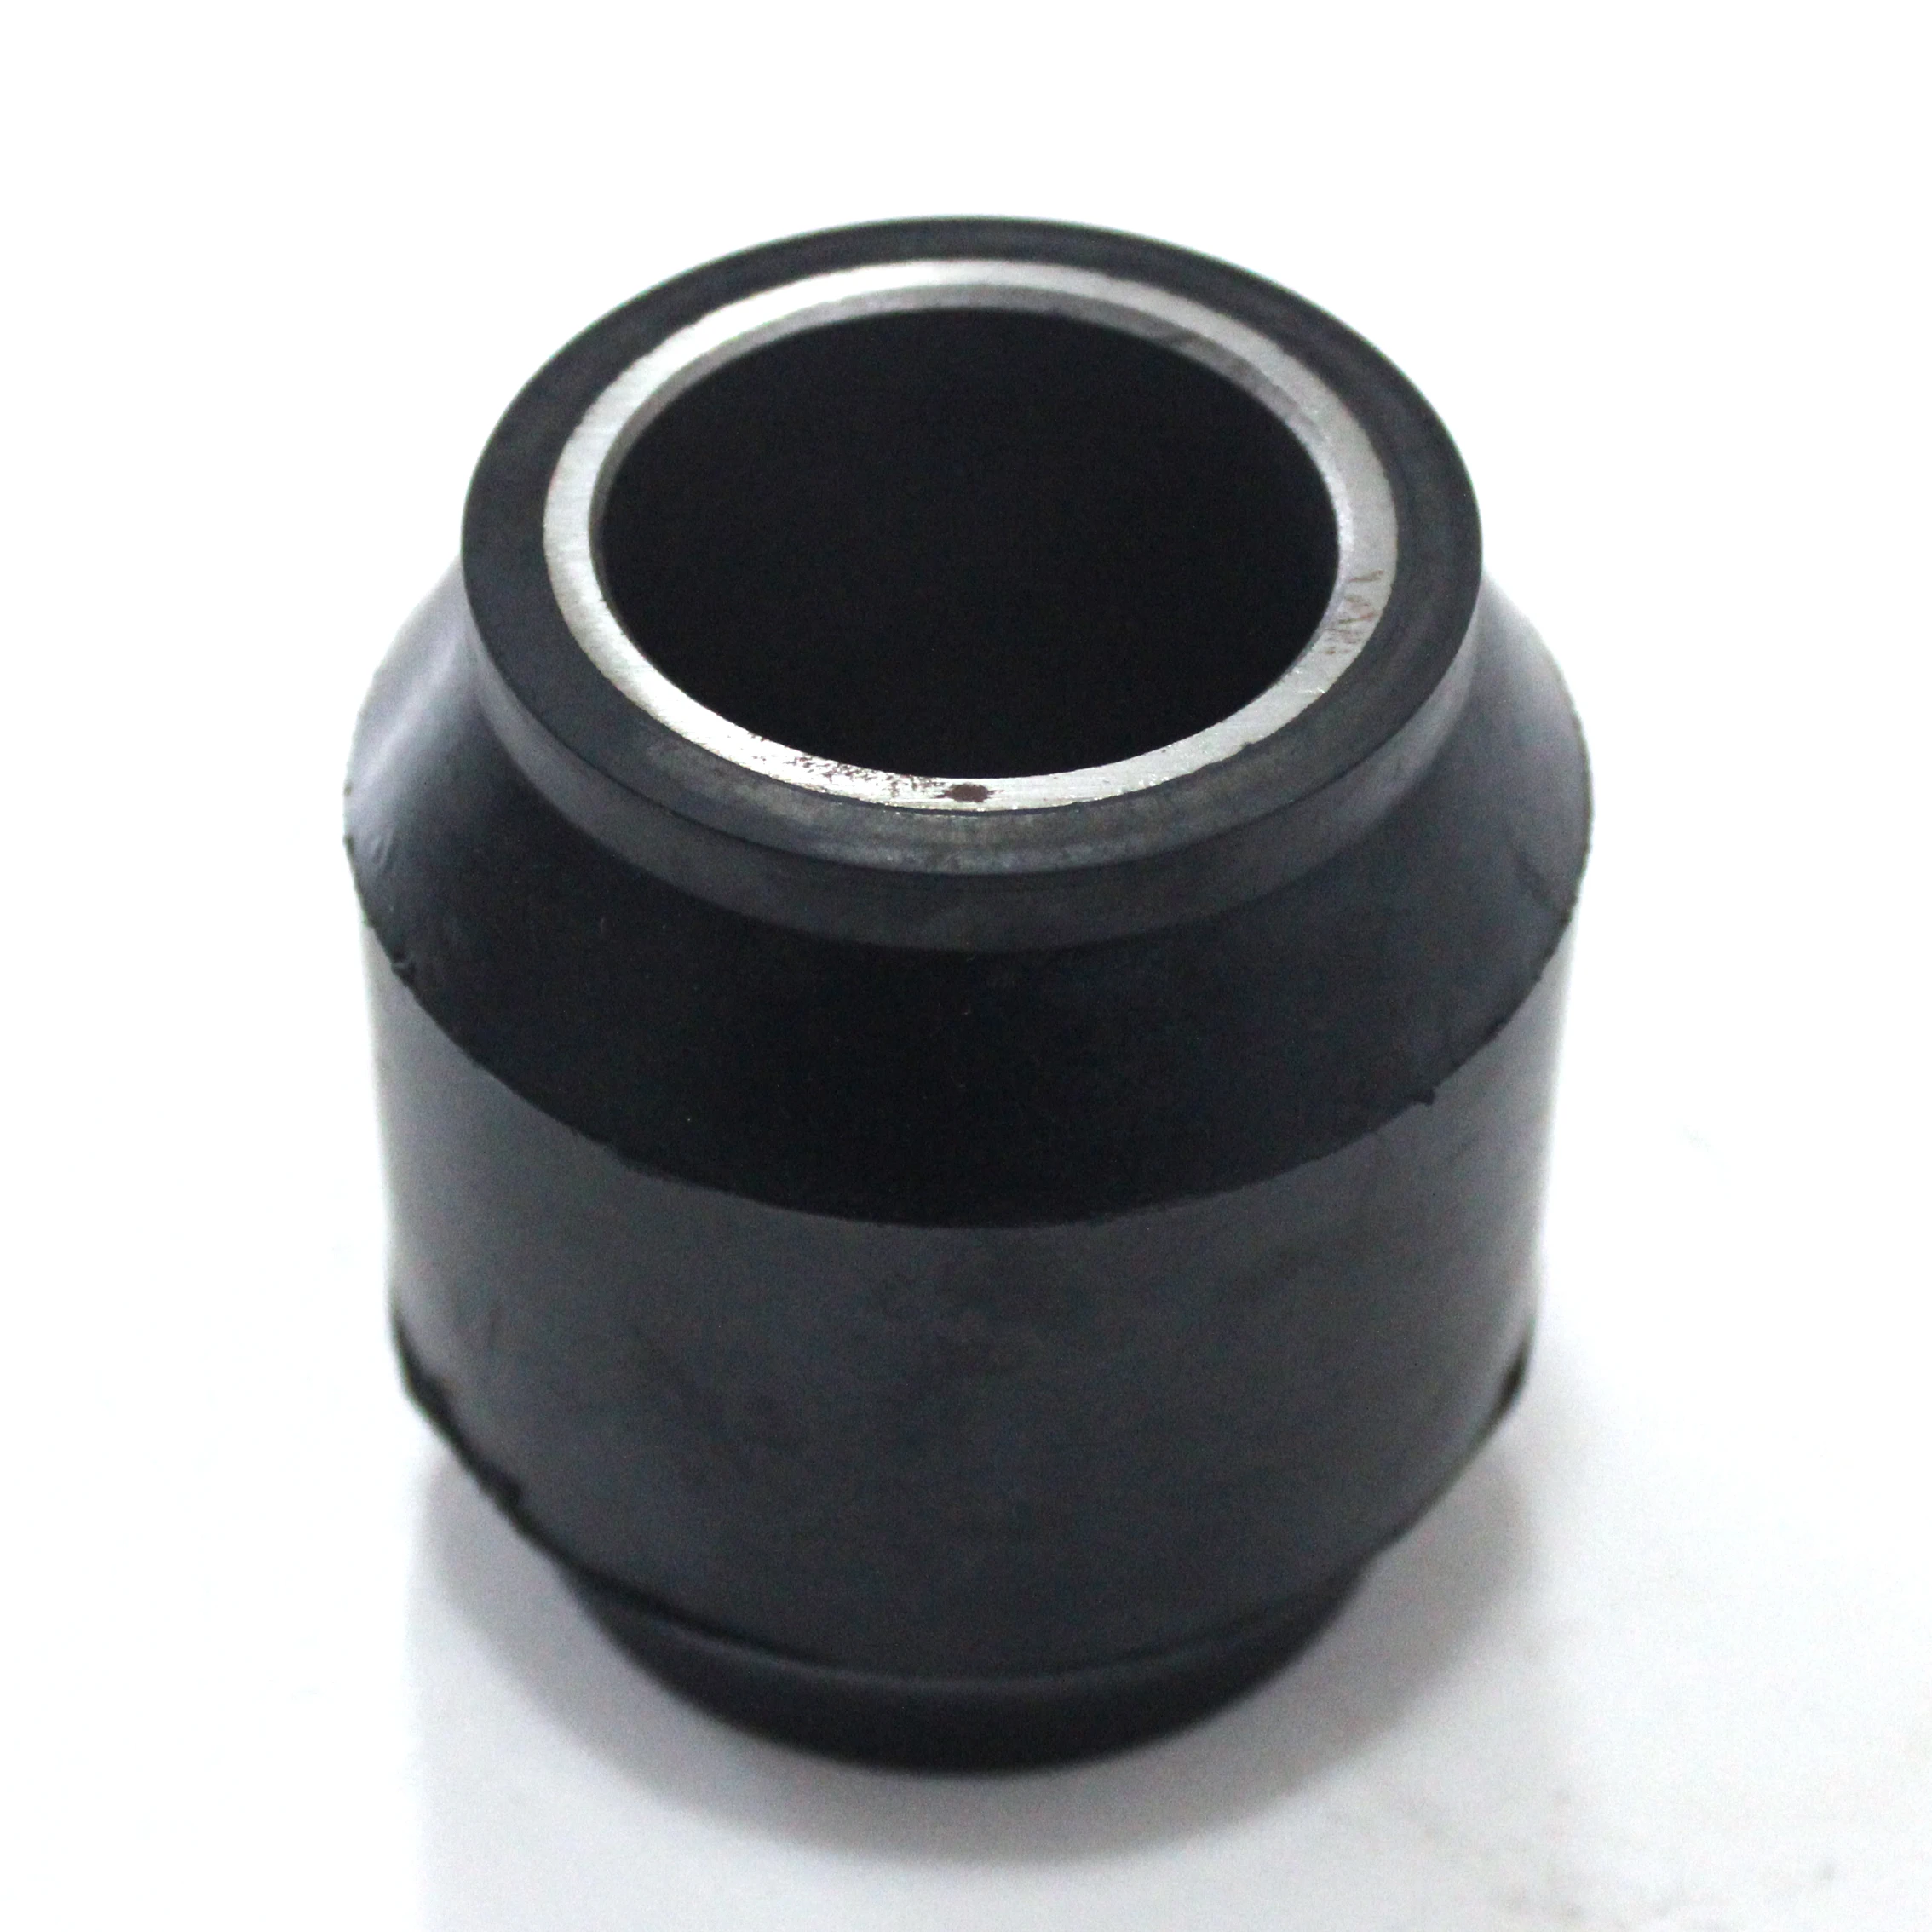 
OEM 0511393030 Rubber bushing for heavy truck made in China 36 * 65.5 * 68 